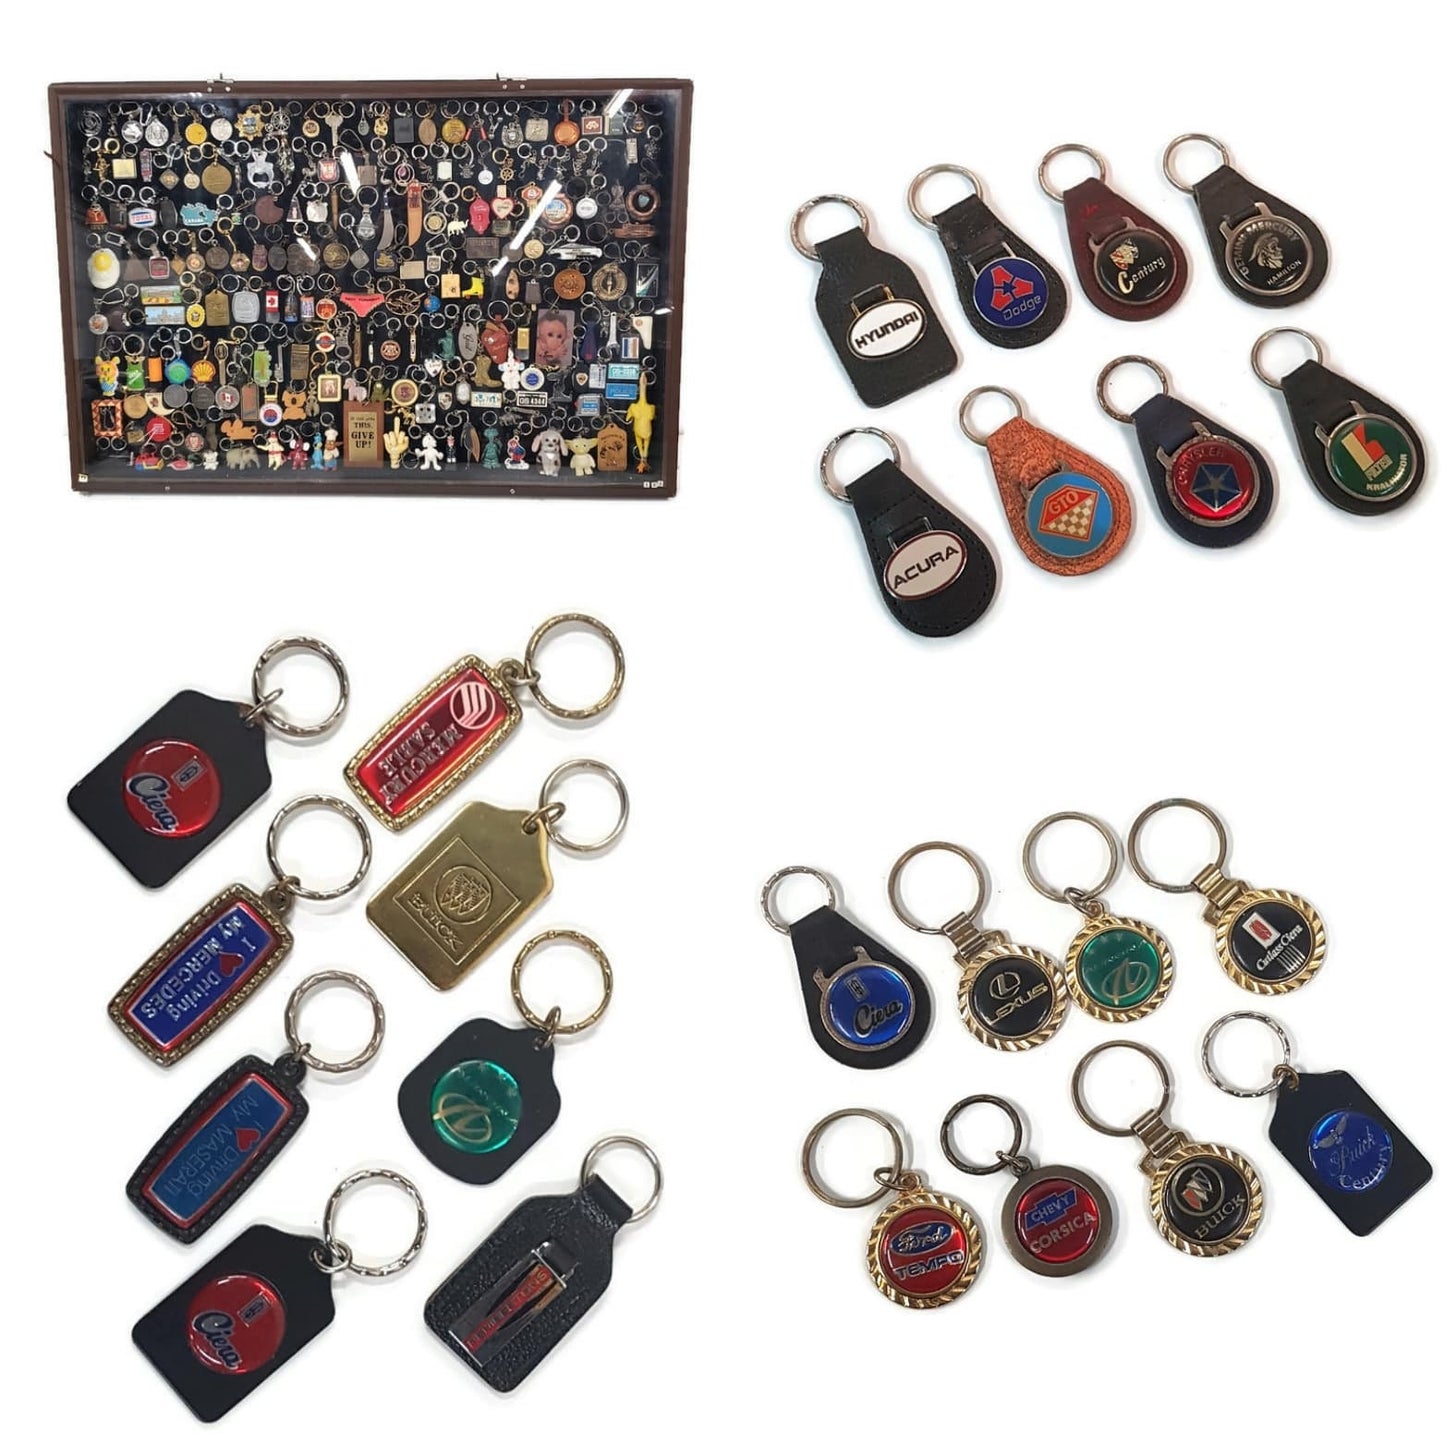 plymouth key chain keychain key fob keytag vintage automotove keychain gift collectible